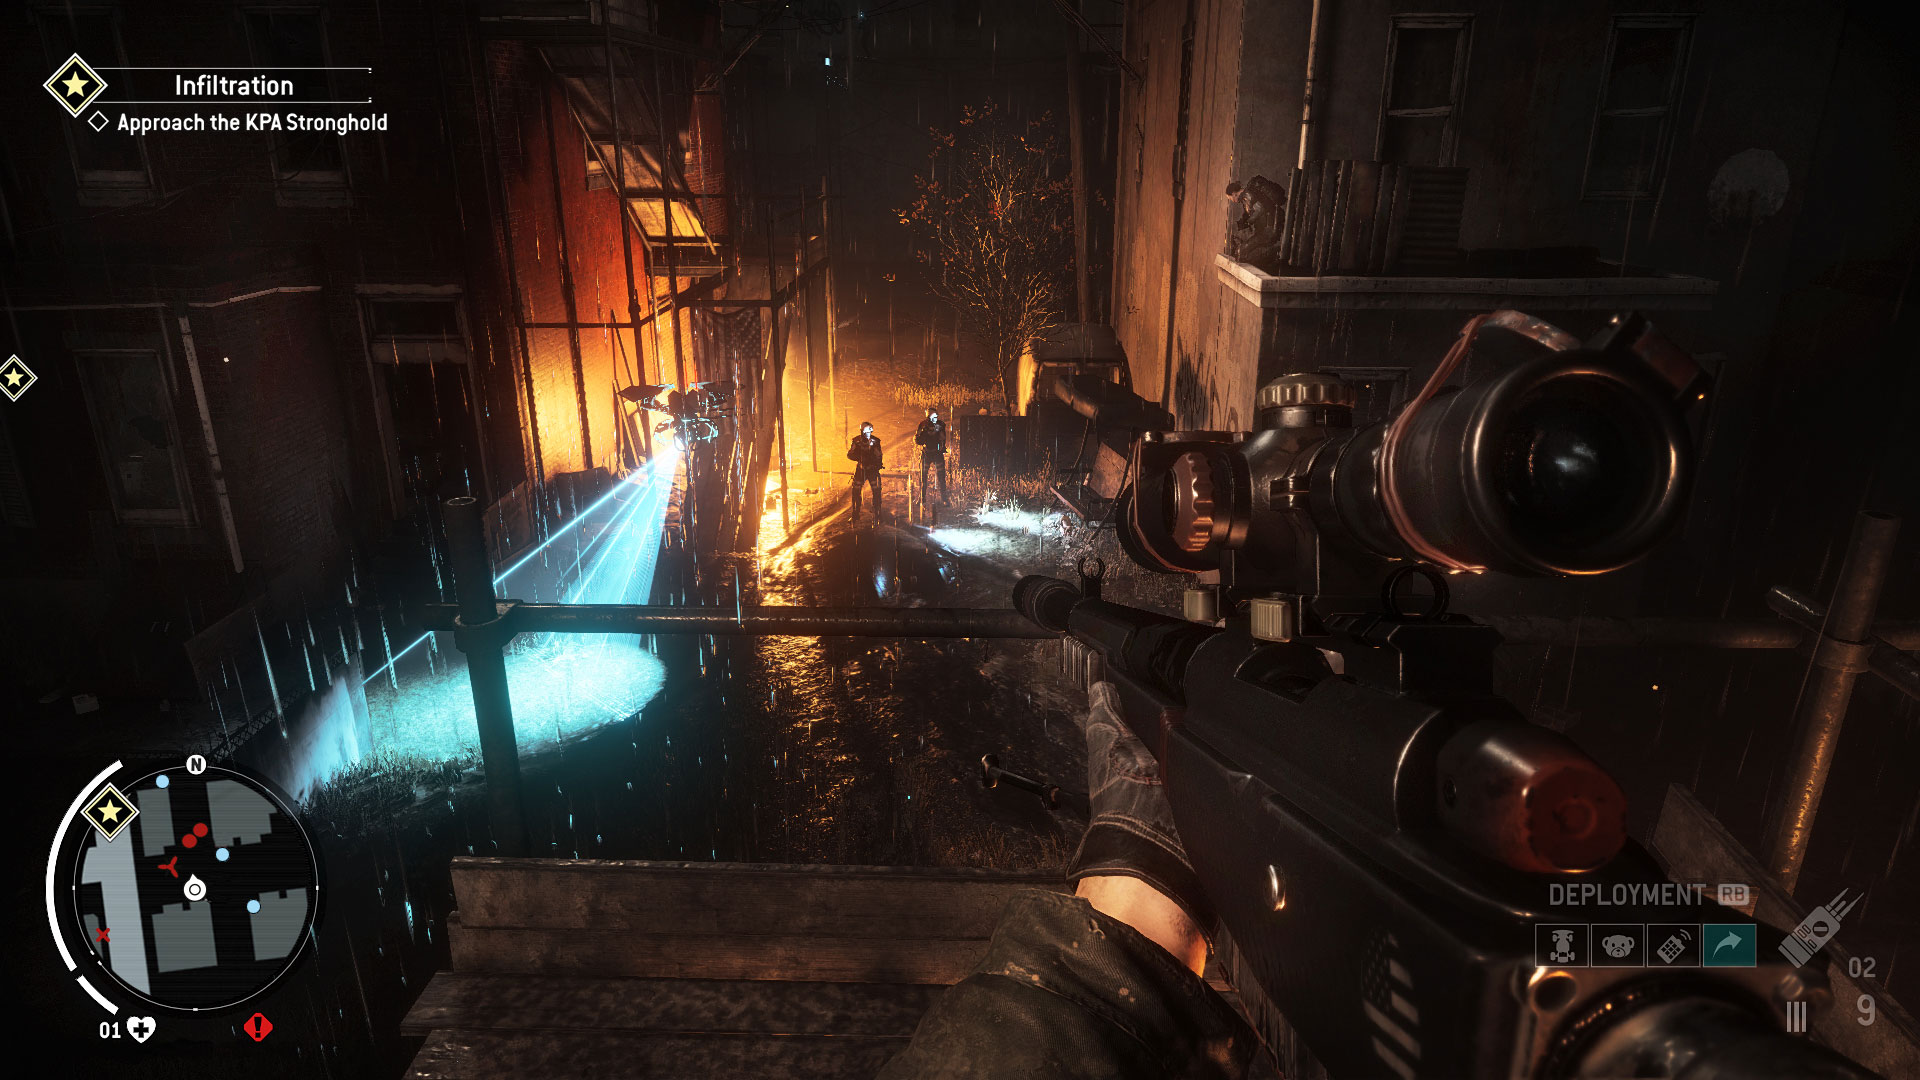 Media asset in full size related to 3dfxzone.it news item entitled as follows: Closed beta, gameplay trailer e screenshots di Homefront: The Revolution | Image Name: news23713_Homefront-The-Revolution_5.jpg